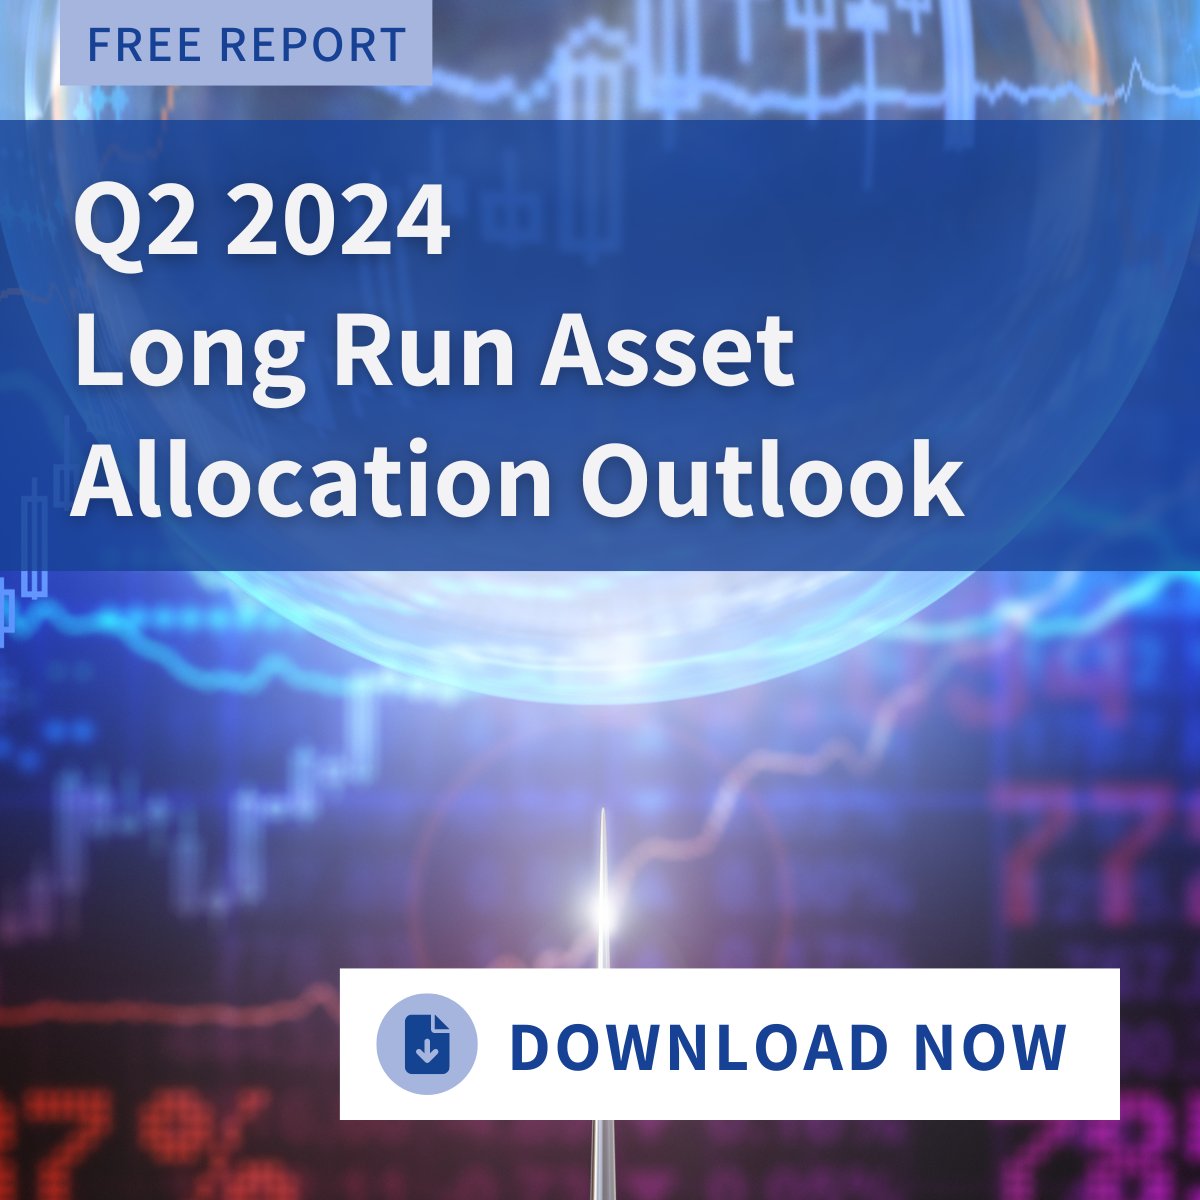 The landscape for commodities may be variable due to the green transition, but bonds and REITs are showing upward trends. Discover more by downloading these key takeaways from our annual Long Run Asset Allocation Outlook report.
shorturl.at/iOSY5
#assetallocation